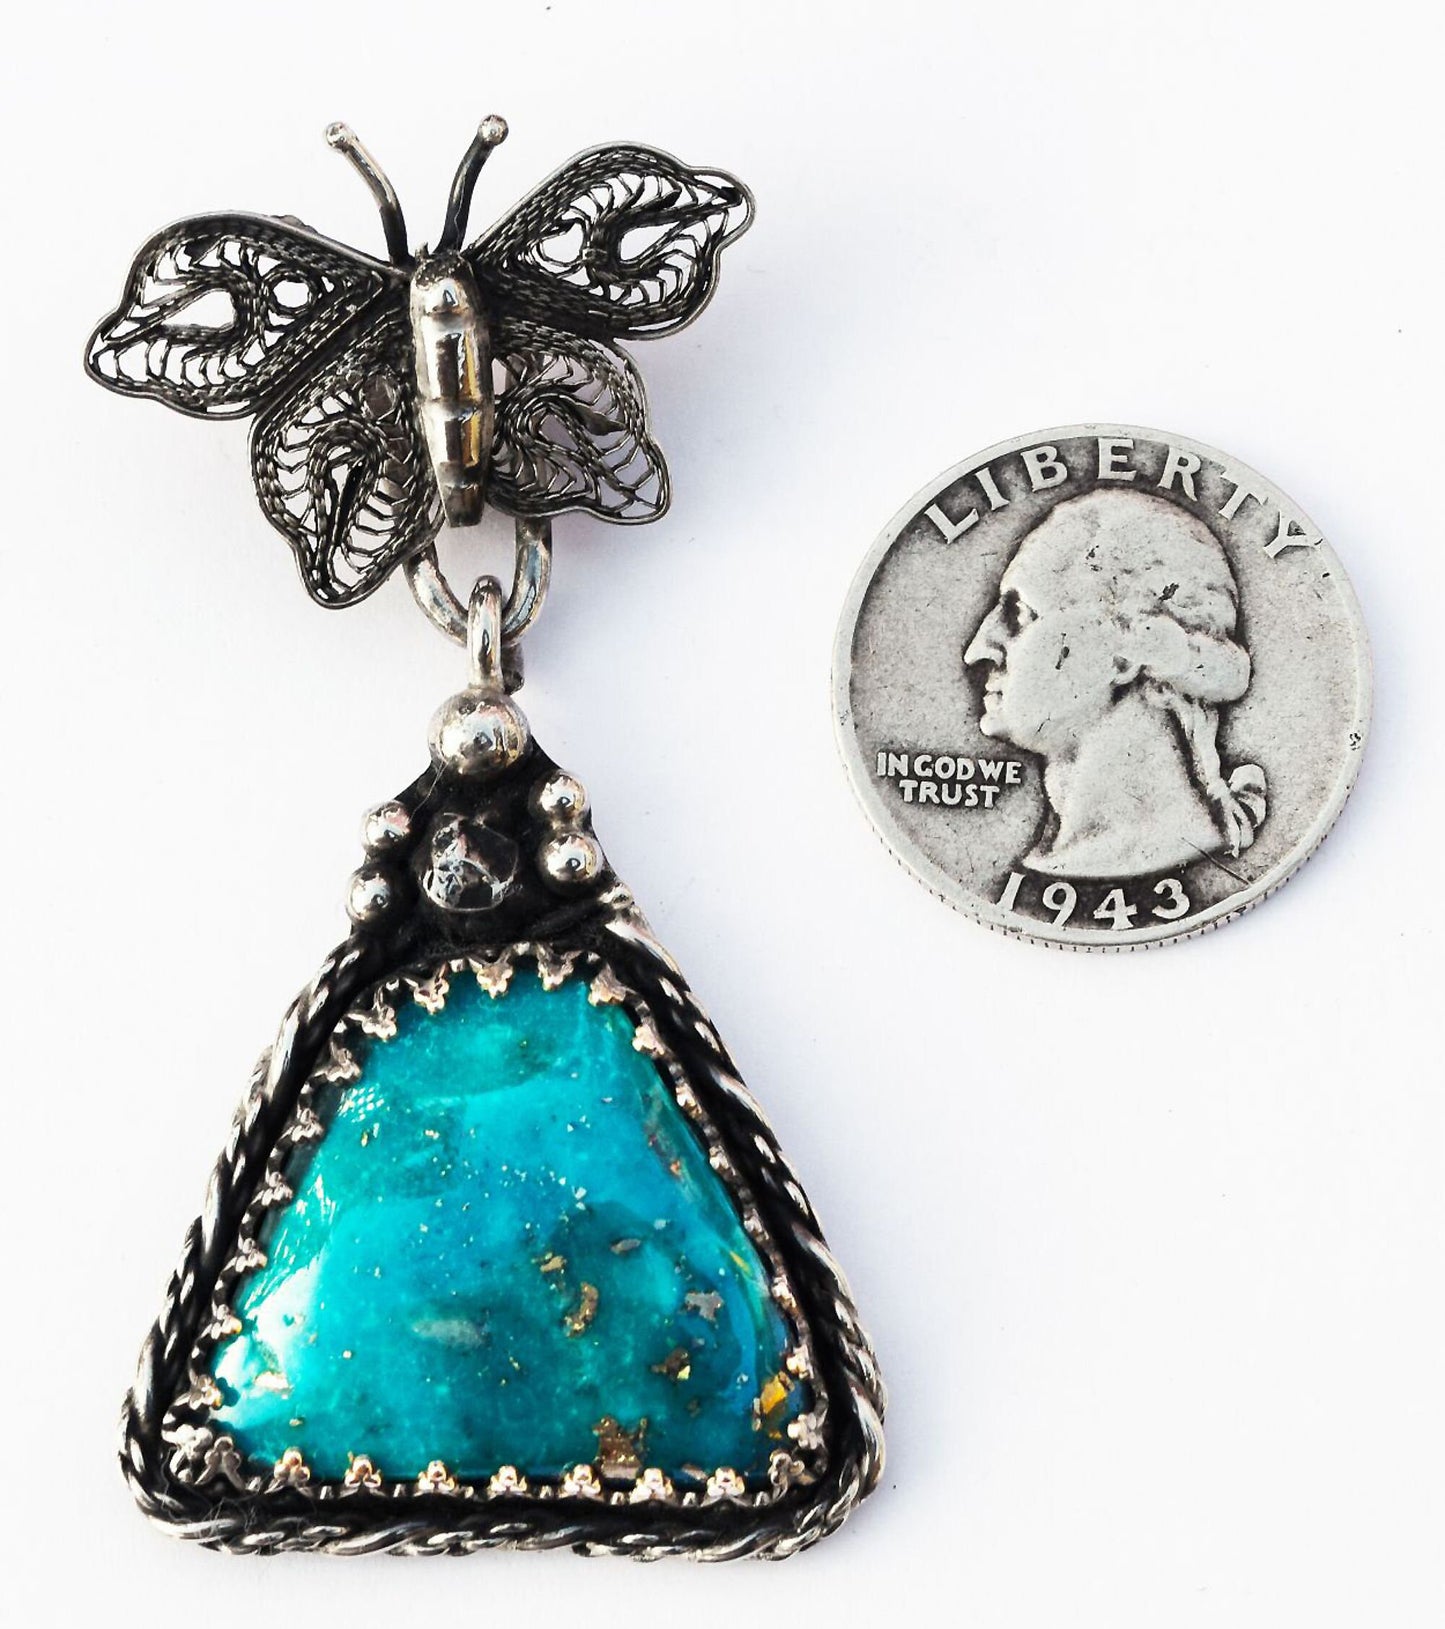 Lovely, handmade, filigreed Sterling Silver butterfly pendant with top color Turquoise.